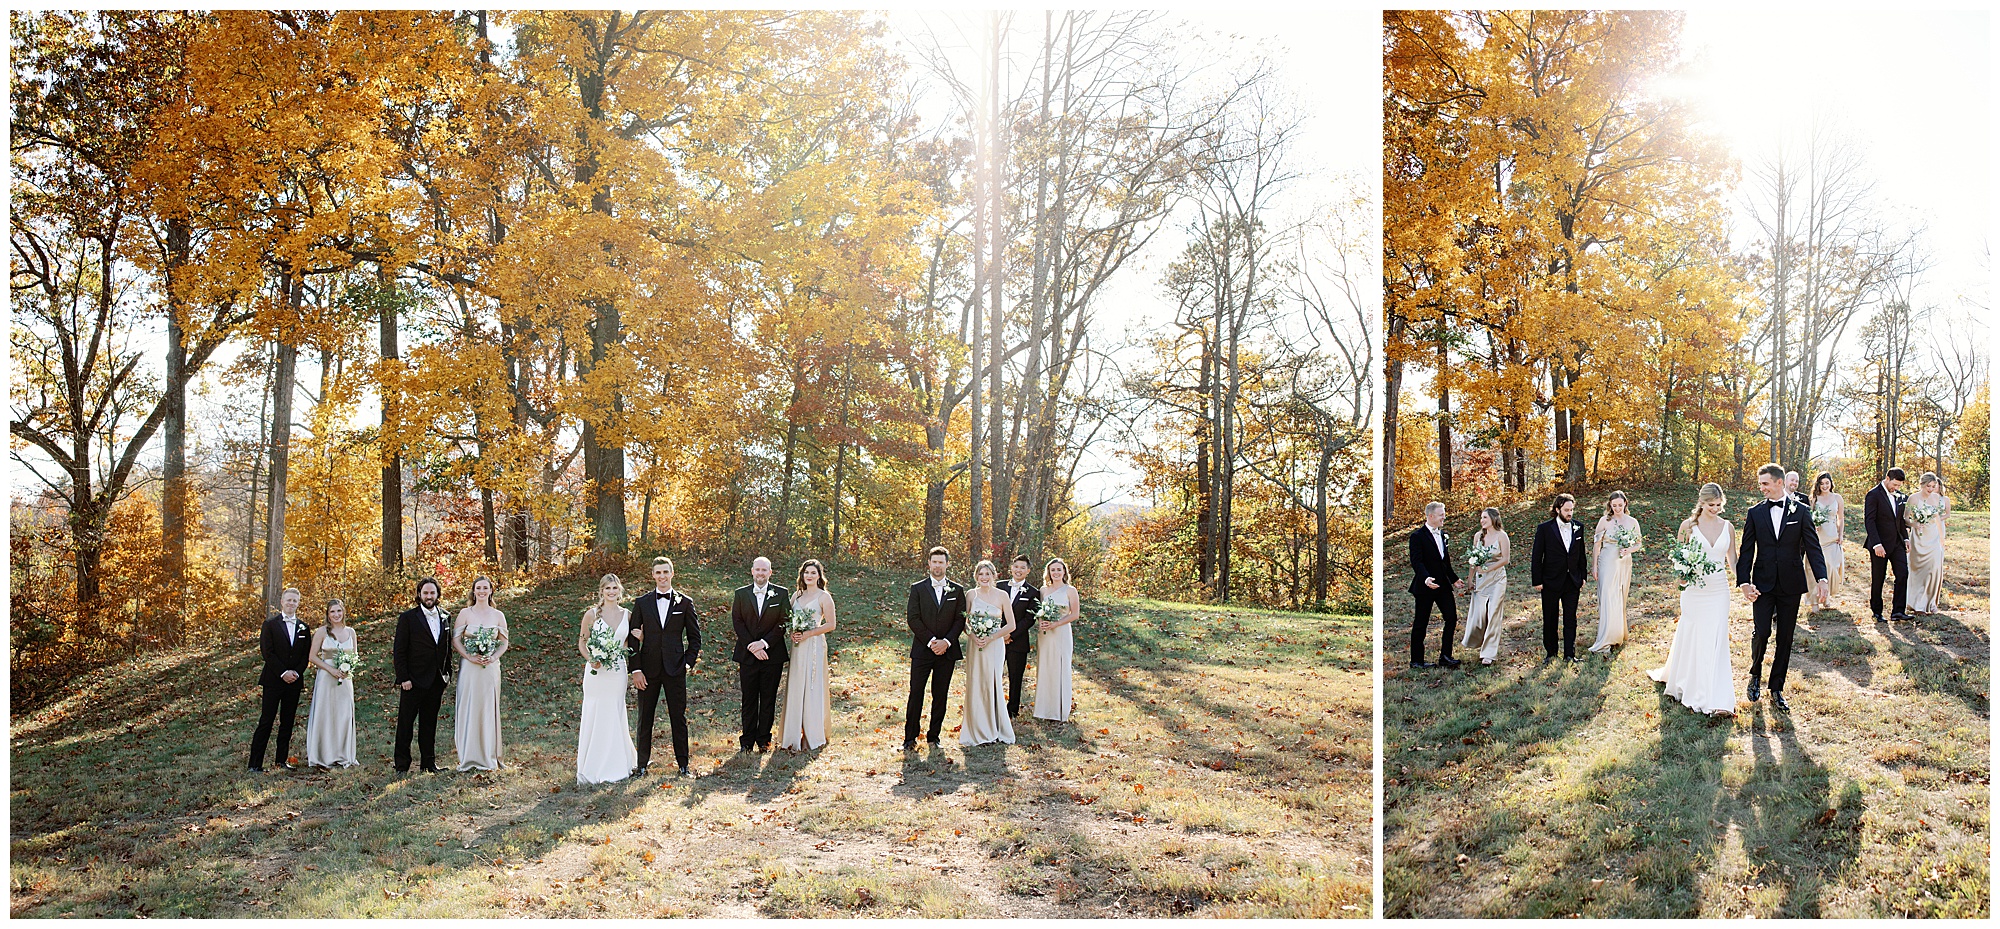 golden light, fall colors and wedding party photography by kathy beaver